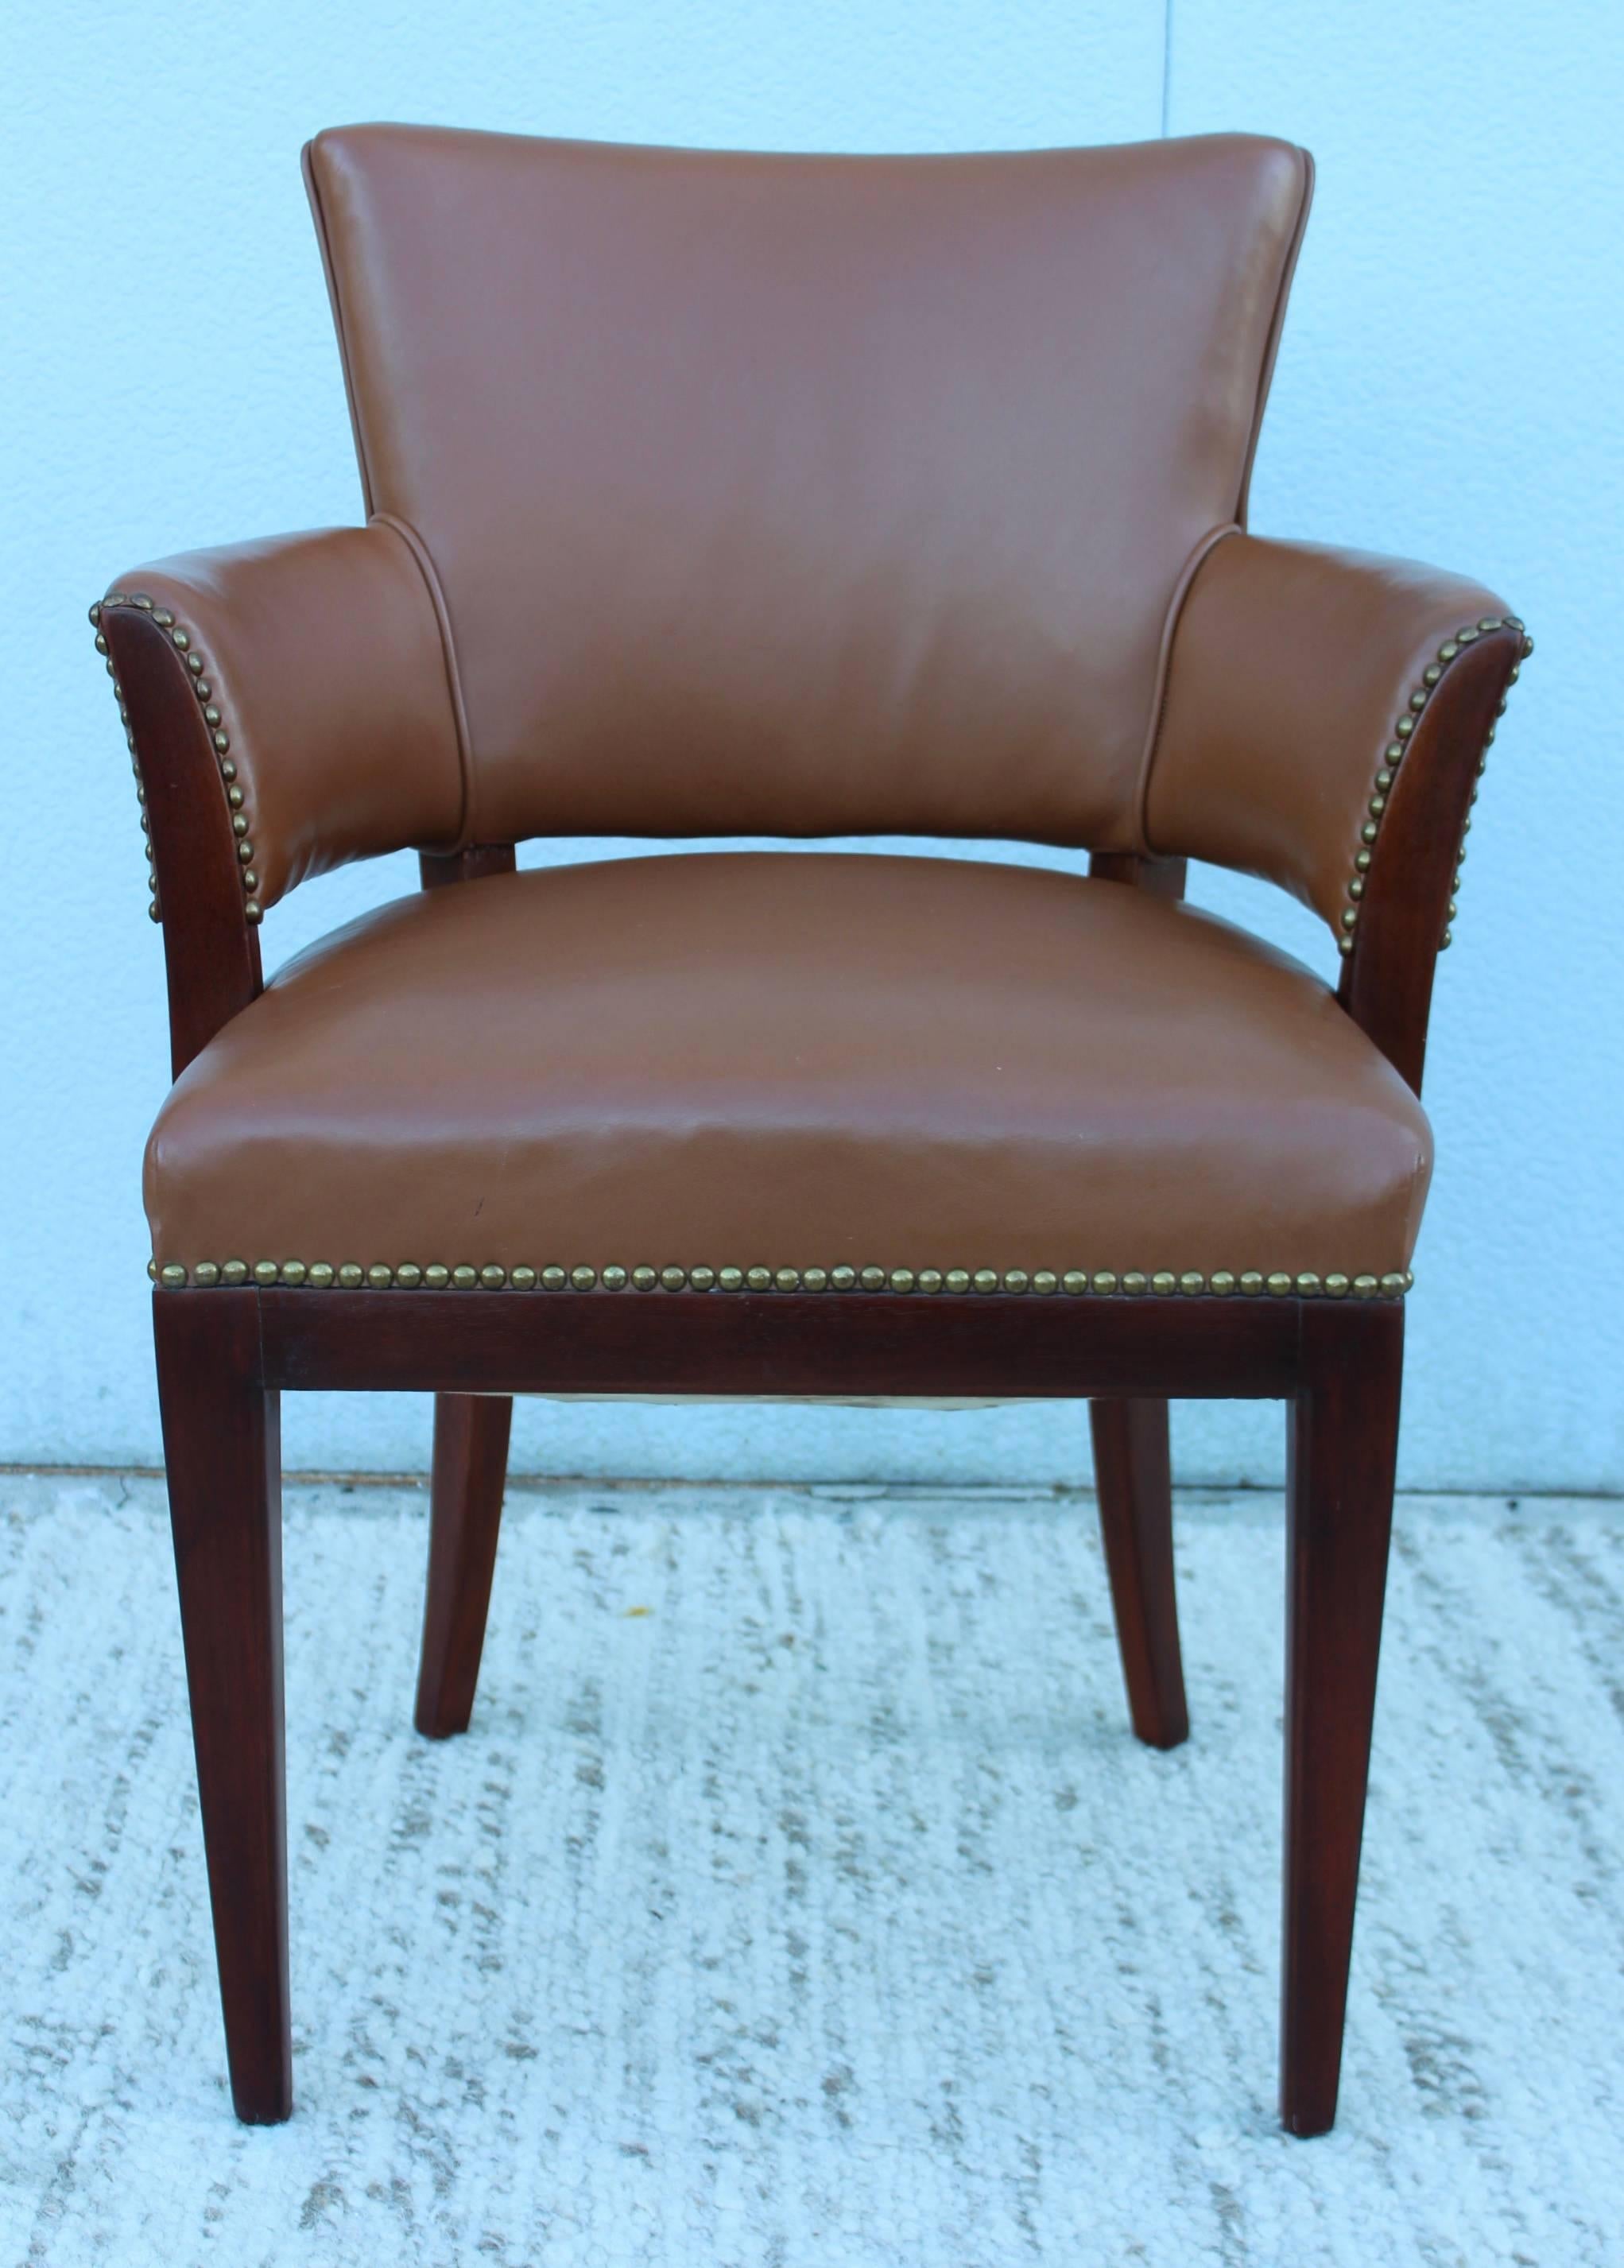 1960s modern walnut and leather armchair with brass nailhead detail.